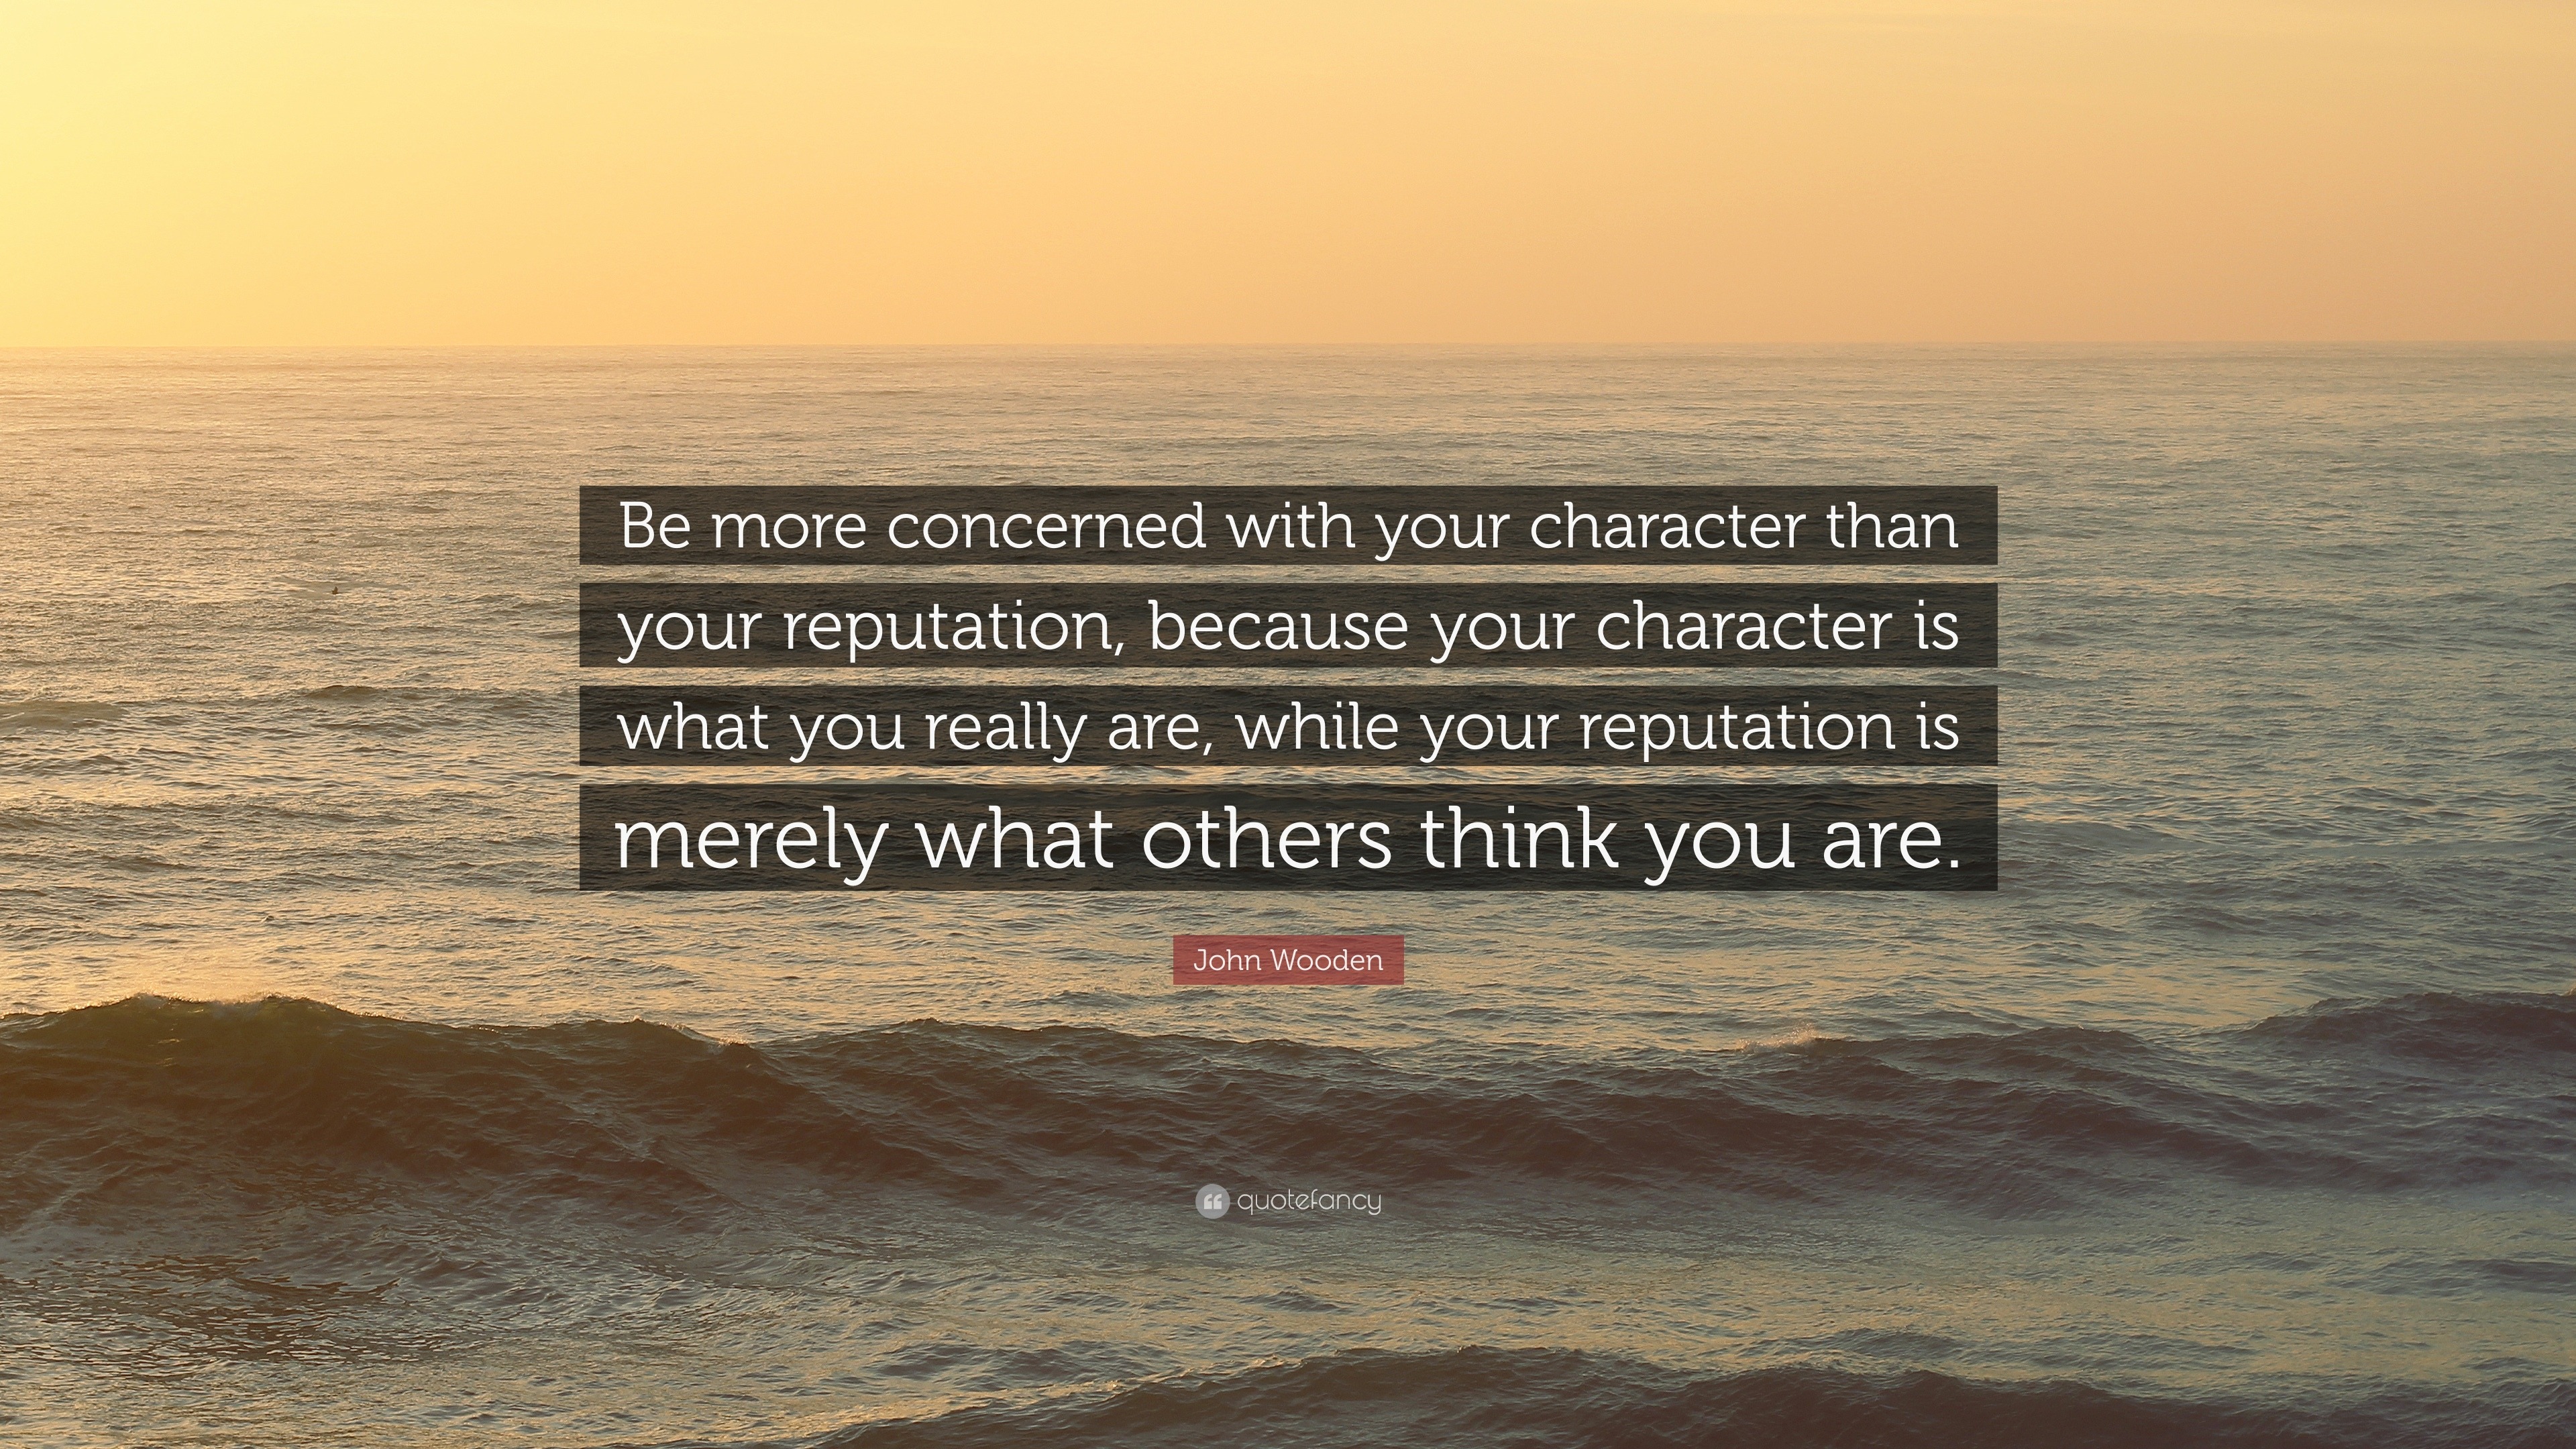 John Wooden Quote: “Be more concerned with your character than your